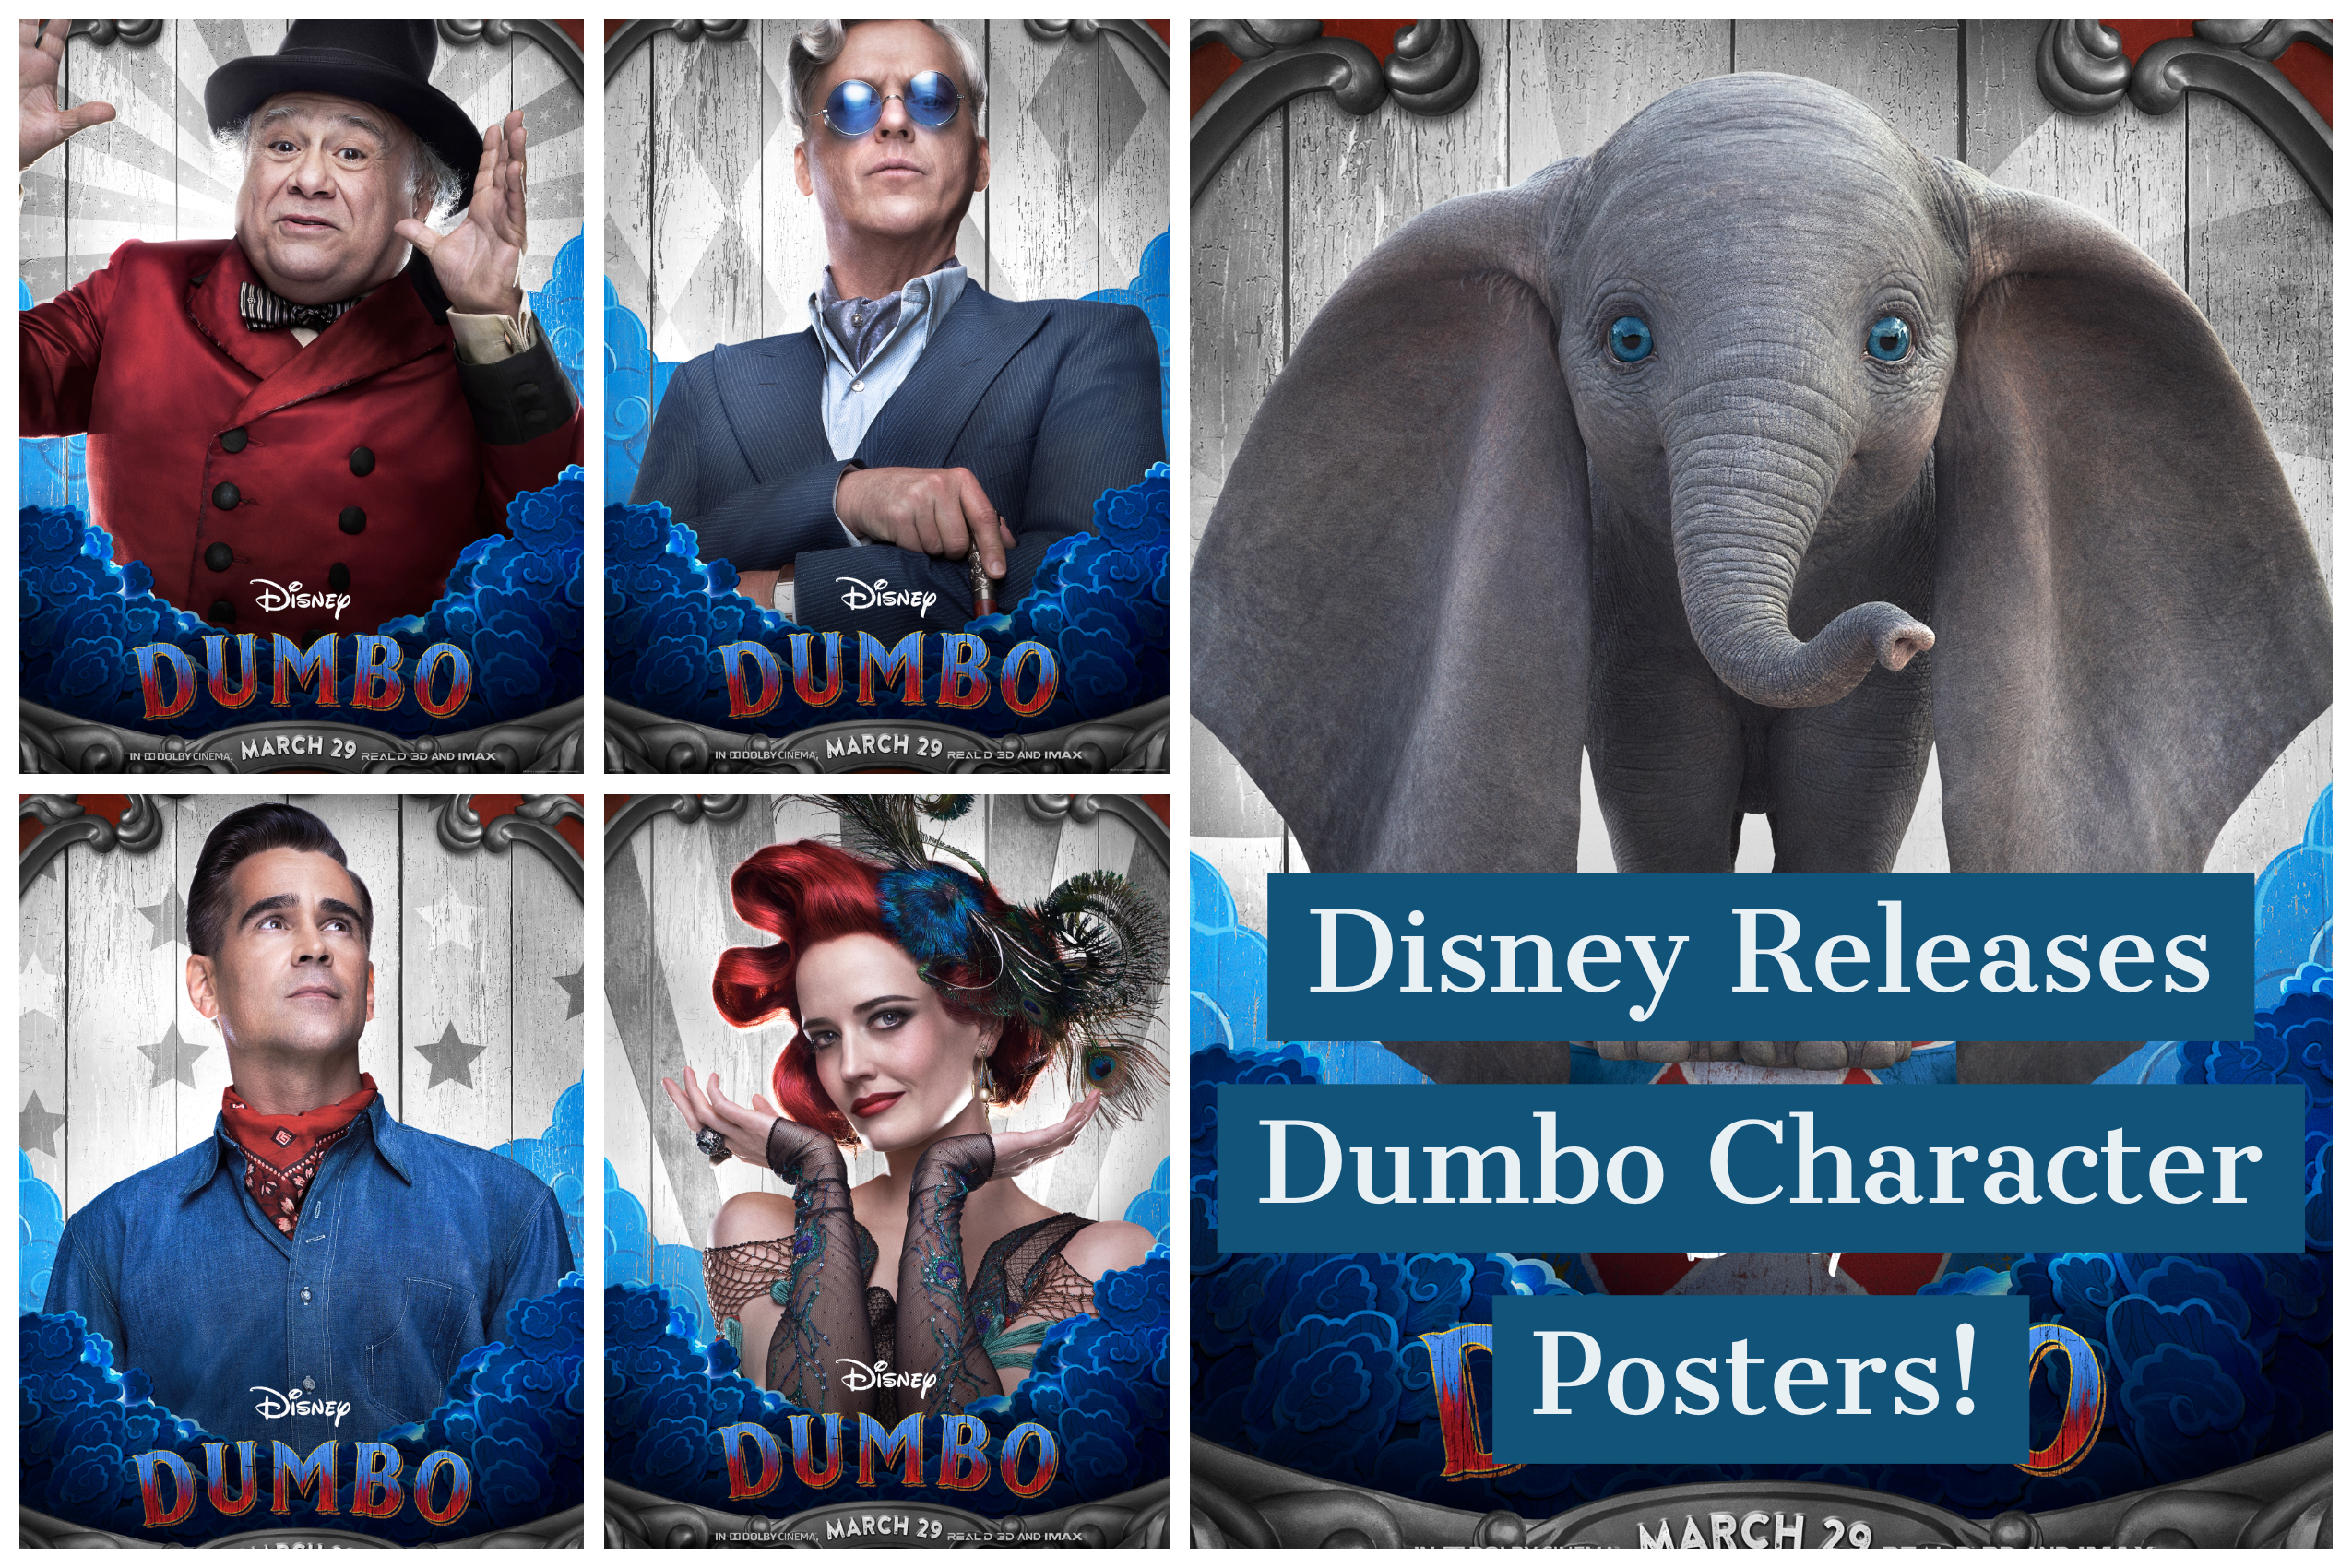 Disney Releases Live-Action Dumbo Character Posters!